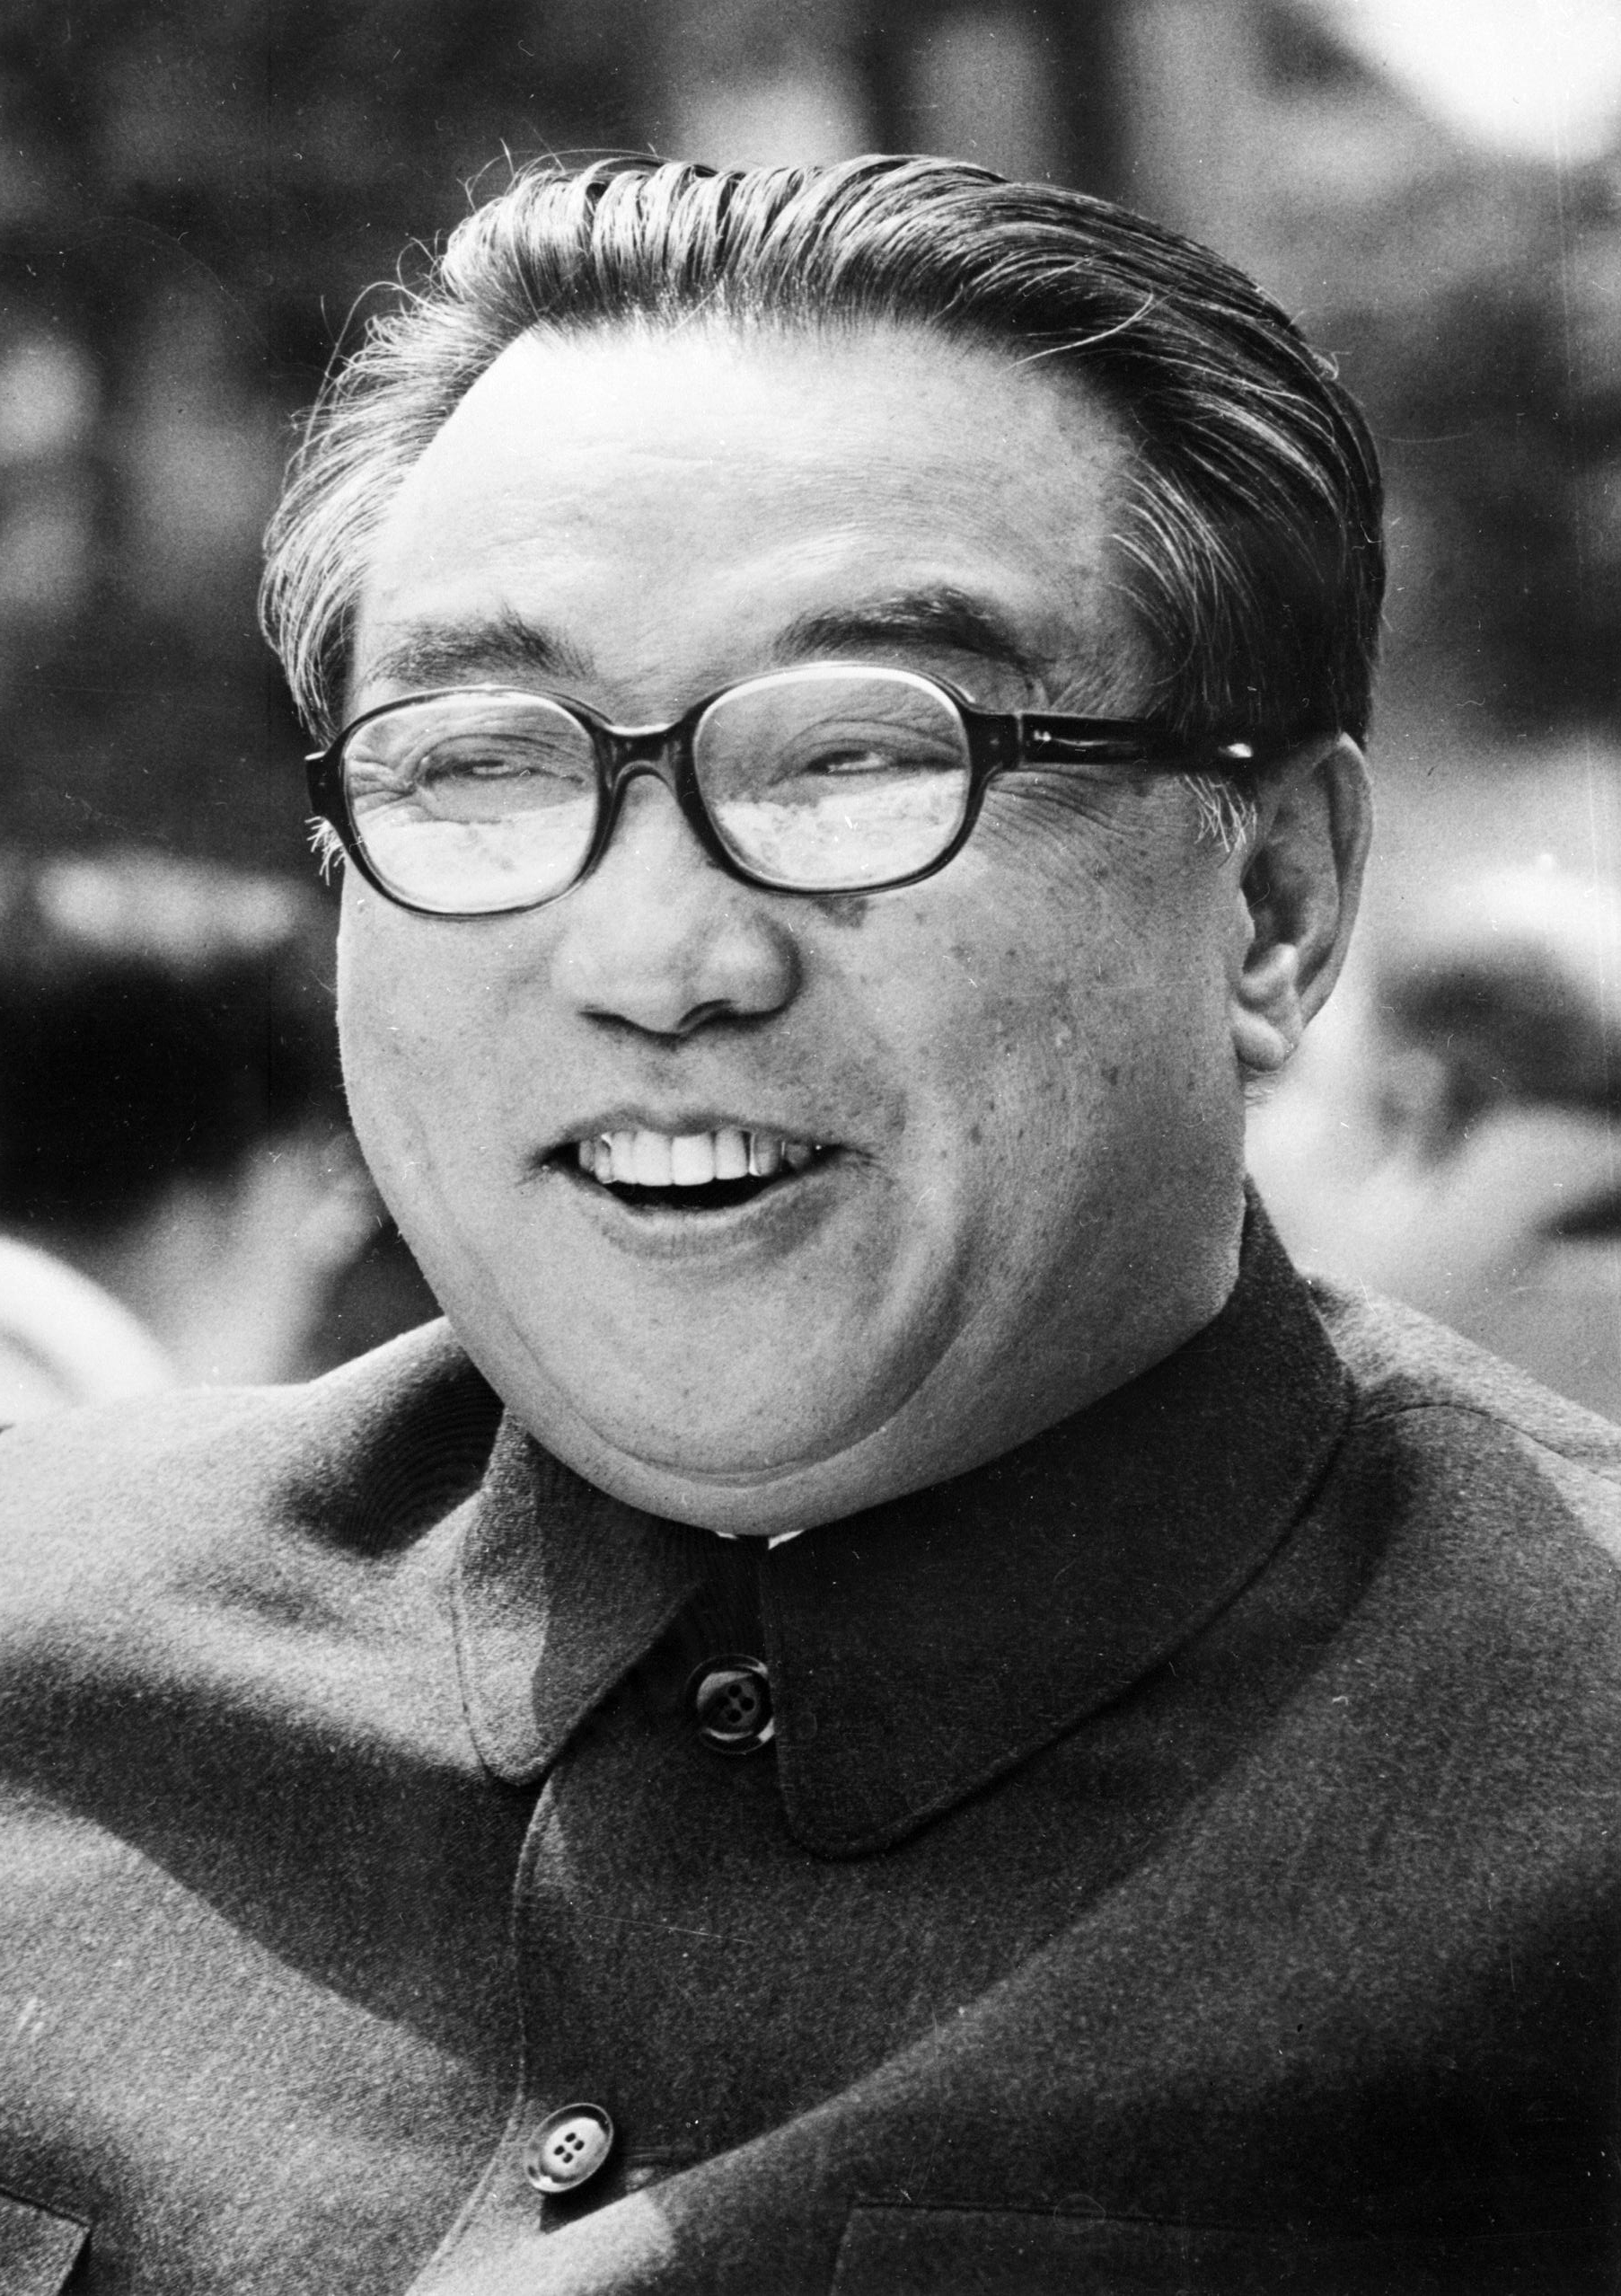 An image of North Korean Leader Kim Il Sung dated July 1976.